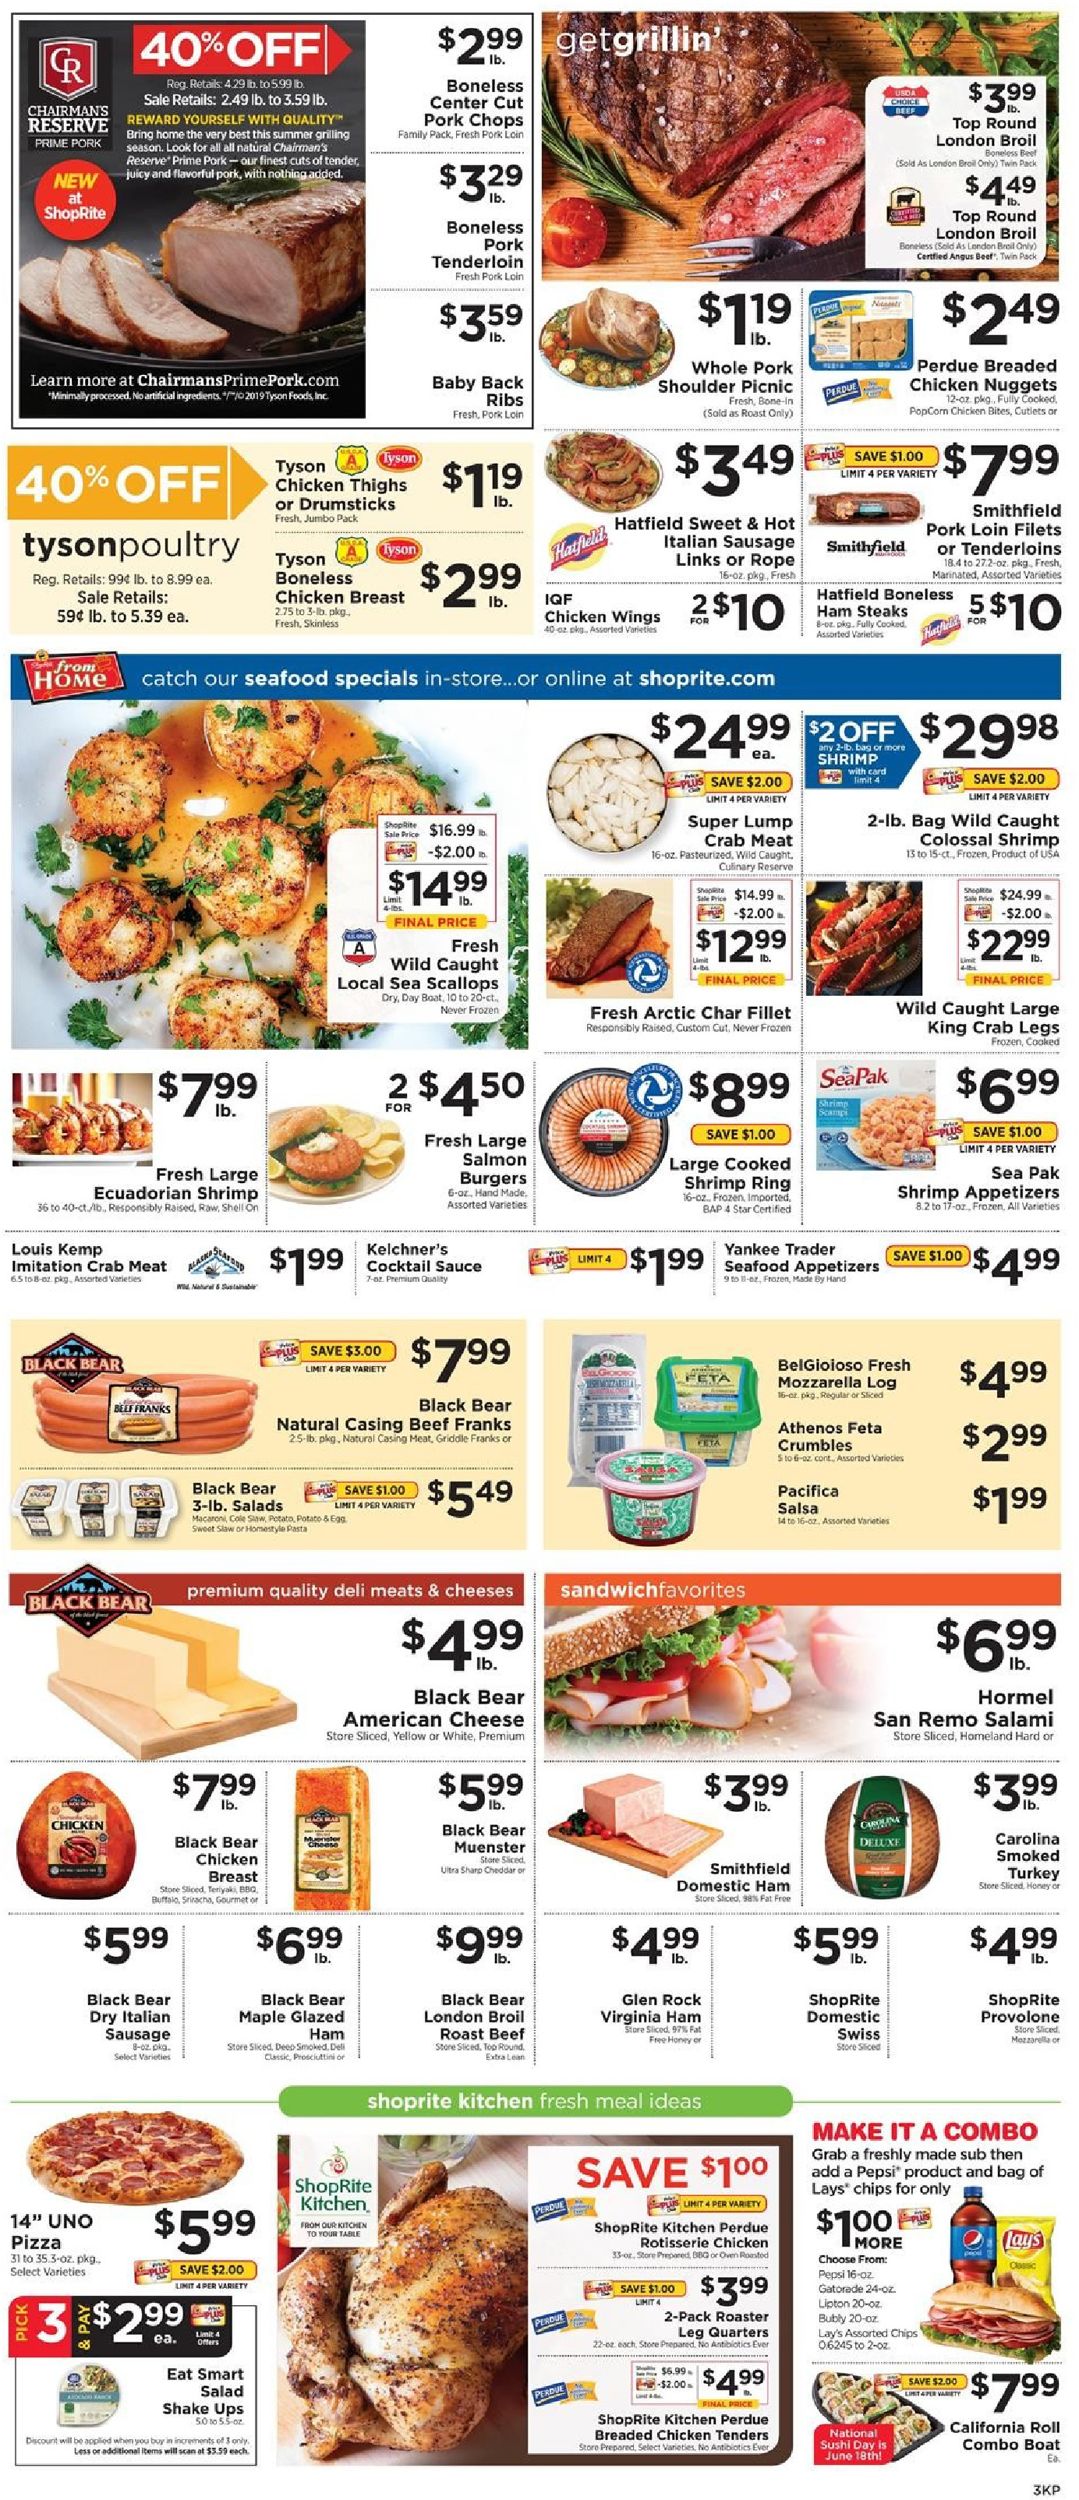 ShopRite Current weekly ad 06/16 - 06/21/2019 [3] - frequent-ads.com